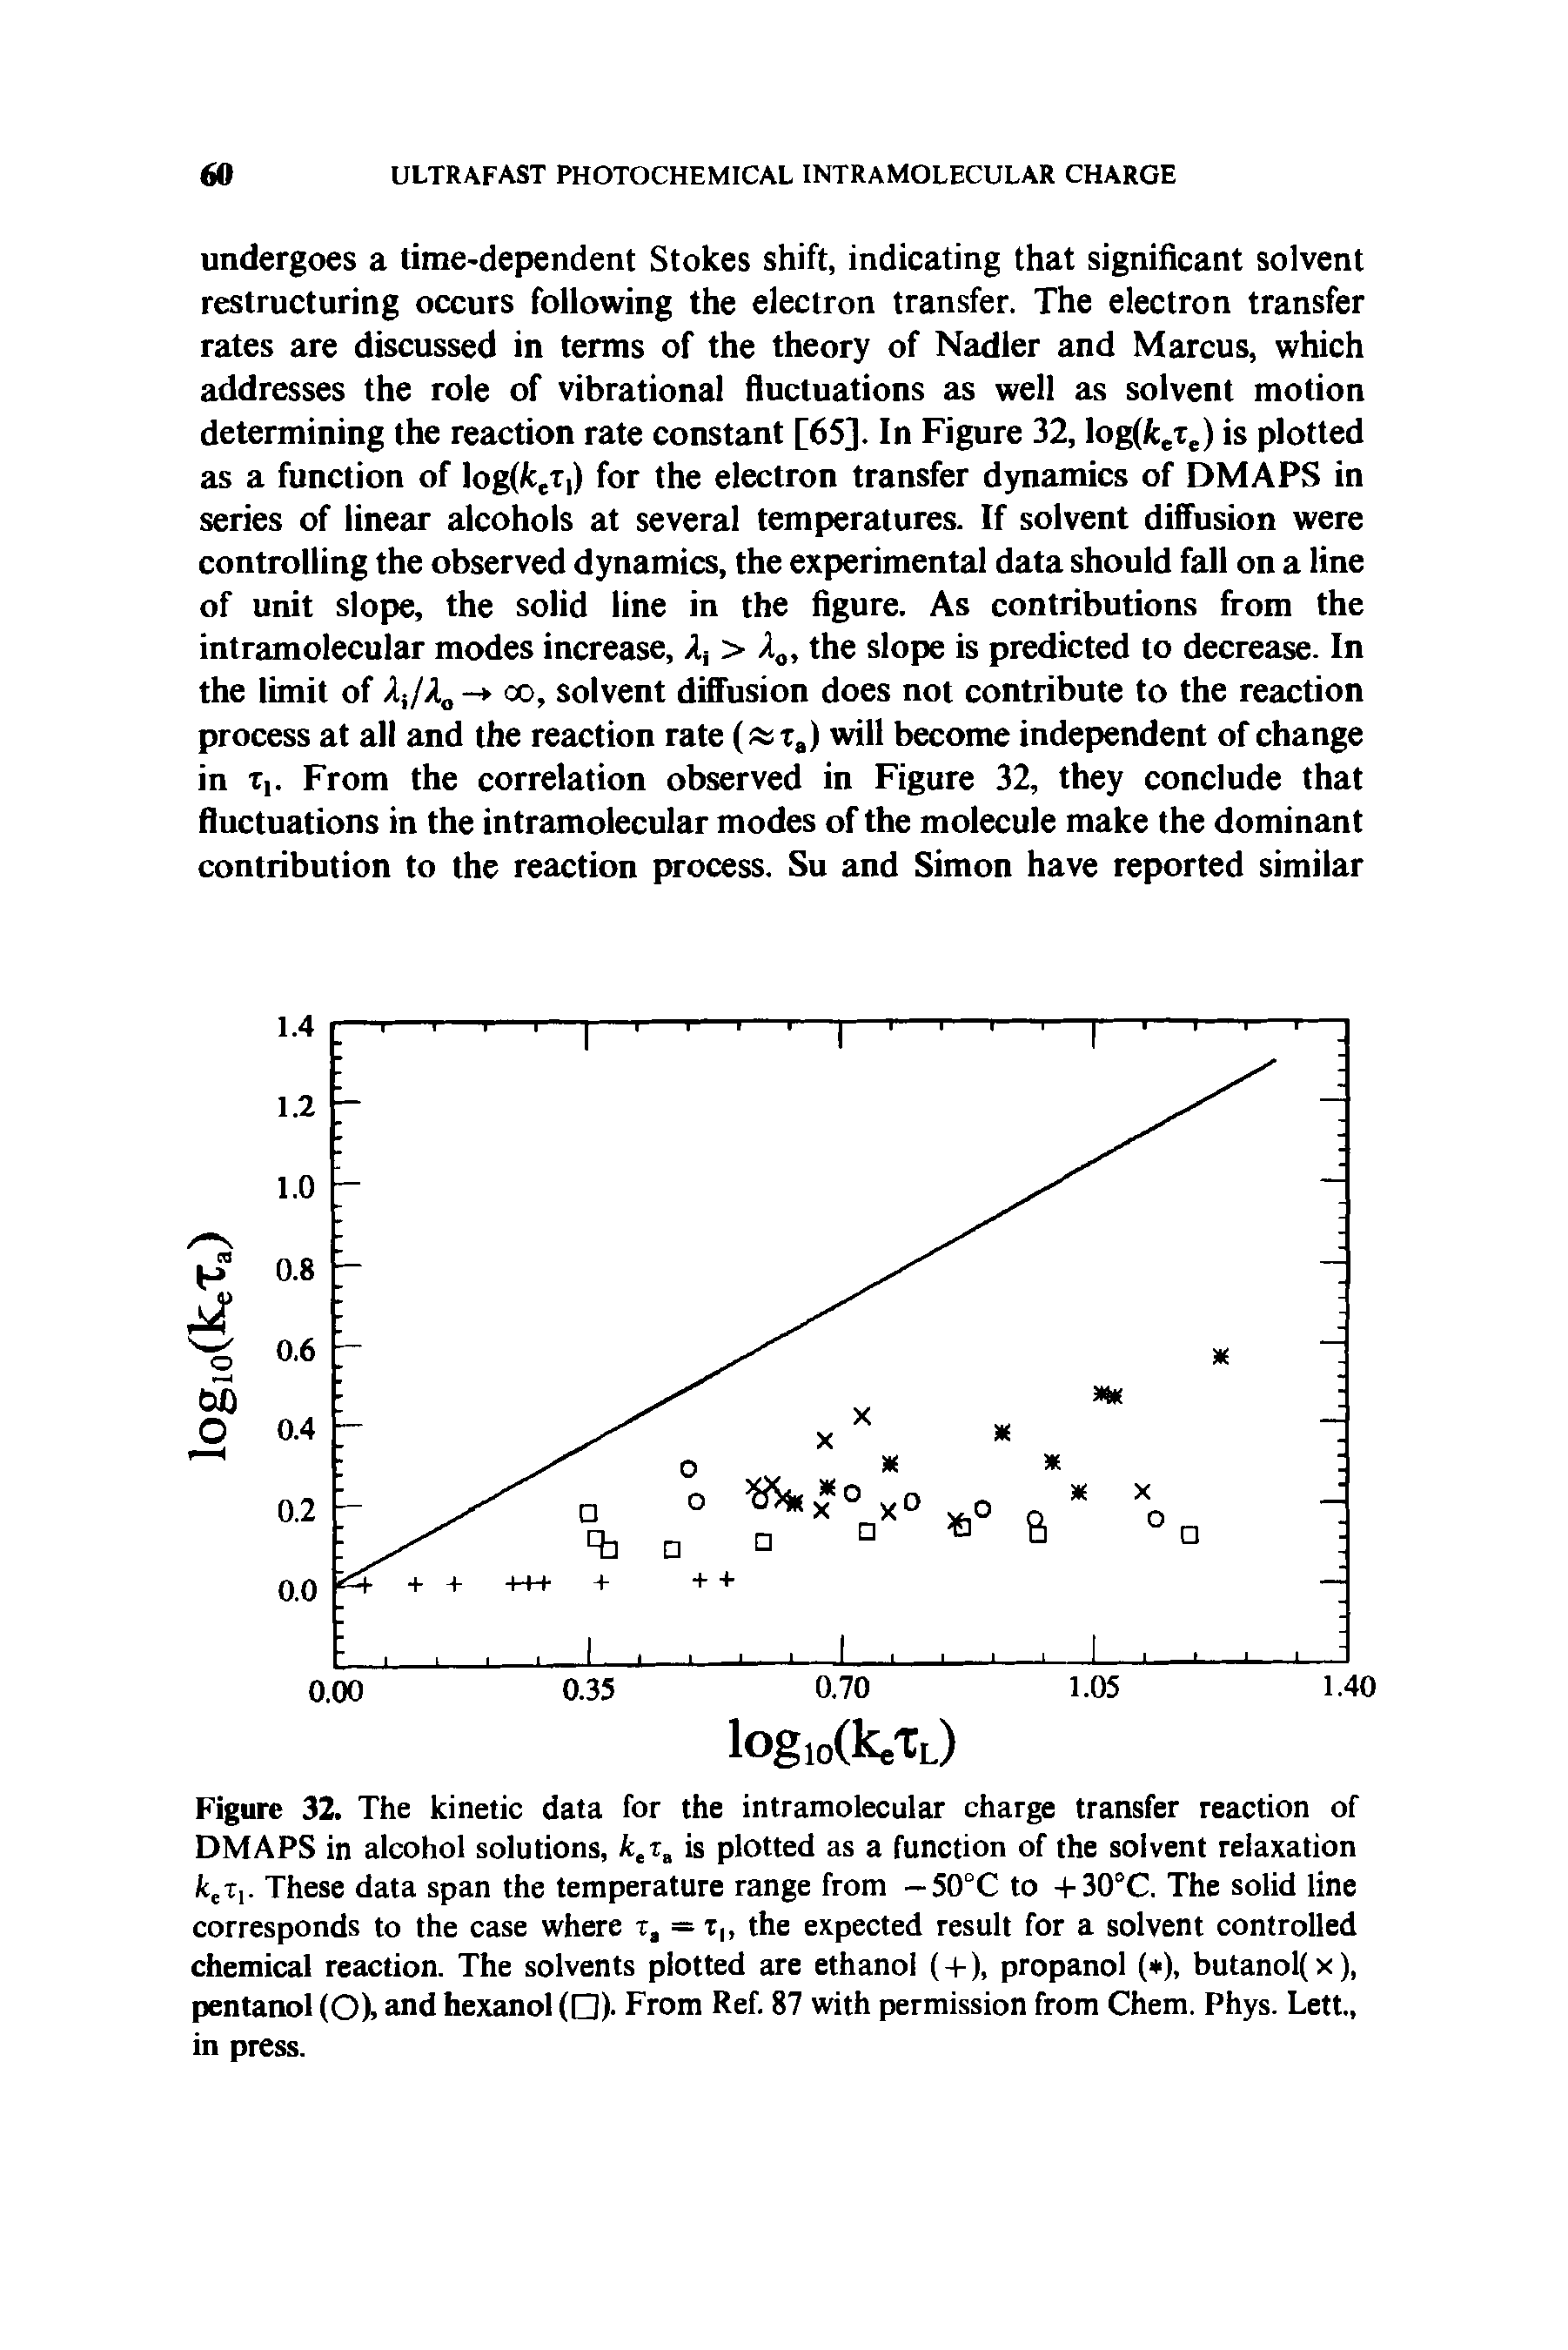 Figure 32. The kinetic data for the intramolecular charge transfer reaction of DMAPS in alcohol solutions, ktra is plotted as a function of the solvent relaxation fceT,. These data span the temperature range from — 50°C to +30°C. The solid line corresponds to the case where t, = t, the expected result for a solvent controlled chemical reaction. The solvents plotted are ethanol ( + ), propanol ( ), butanol(x), pentanol (Ok and hexanol ( ). From Ref. 87 with permission from Chem. Phys. Lett., in press.